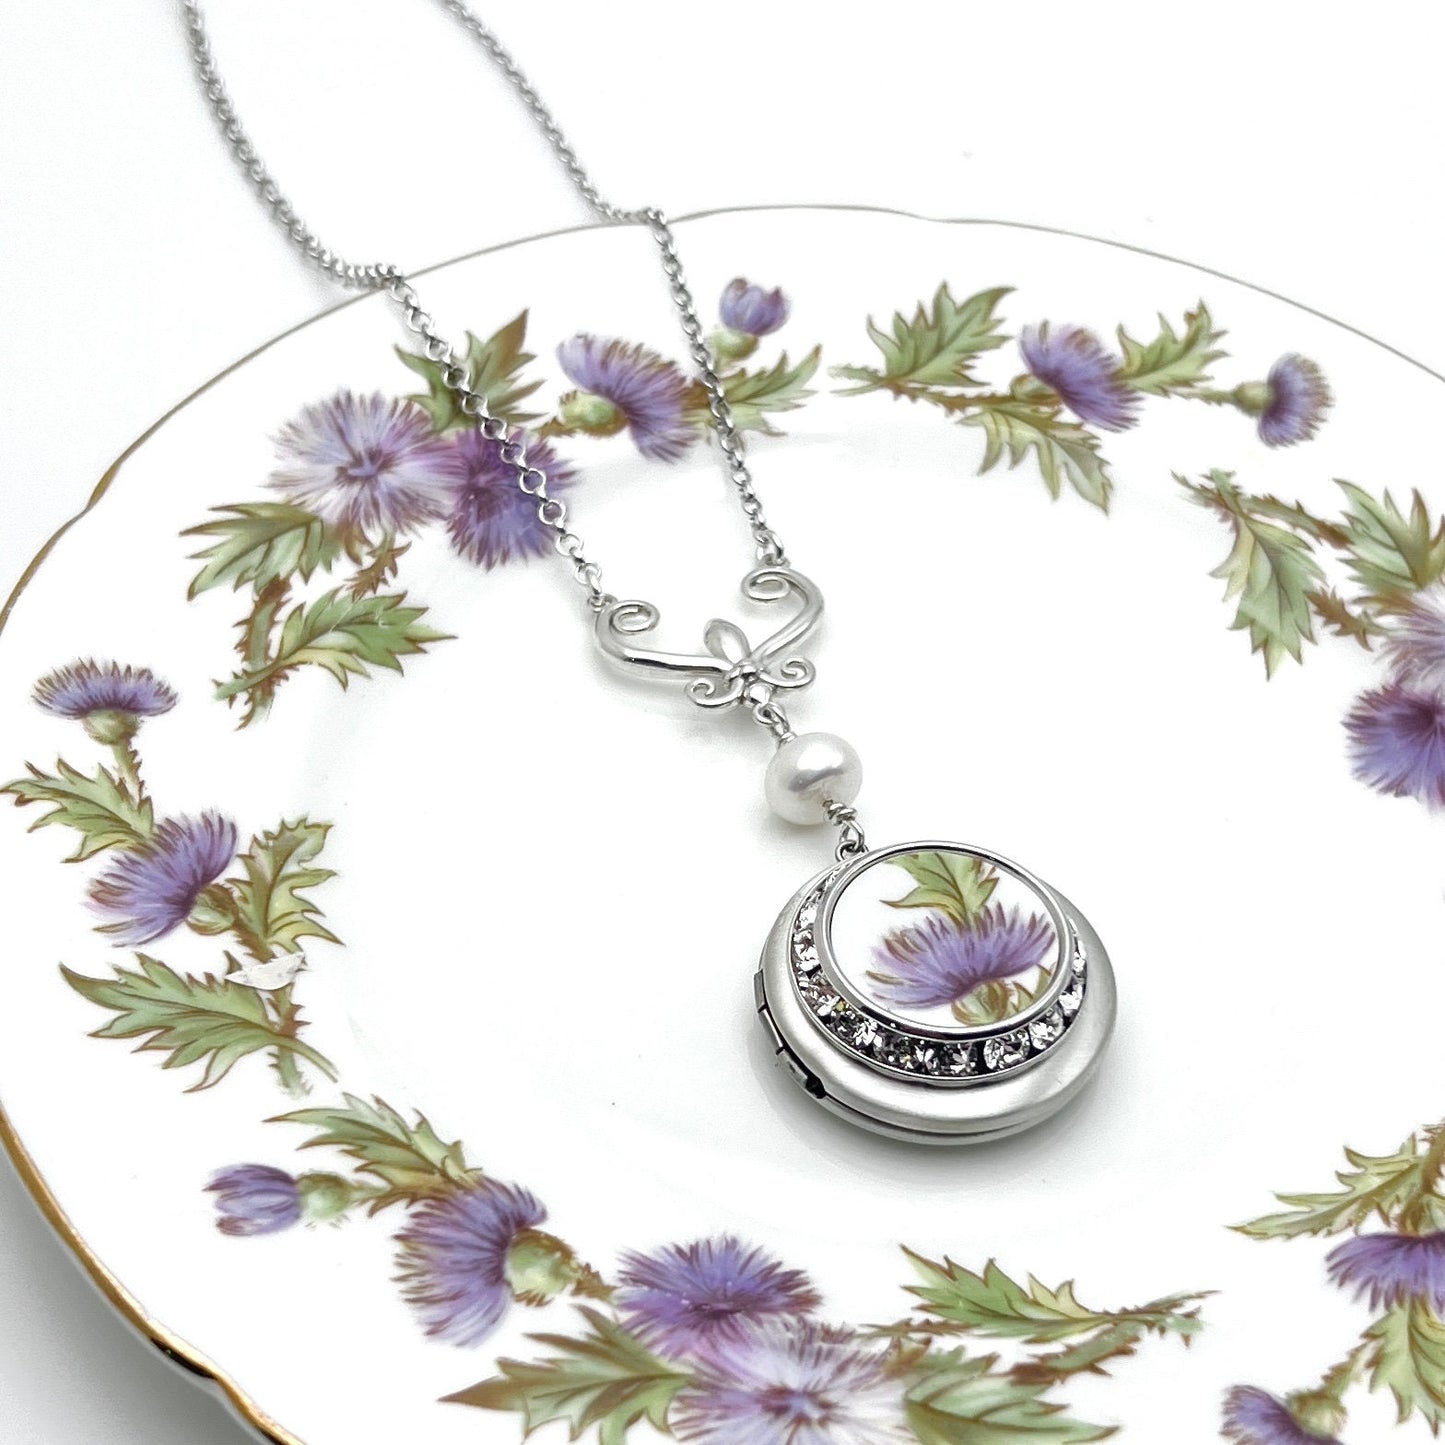 Purple Thistle Locket Necklace, Broken China Jewelry Photo Locket, Scottish Thistle Jewelry, Unique Crystal Jewelry Gifts for Women